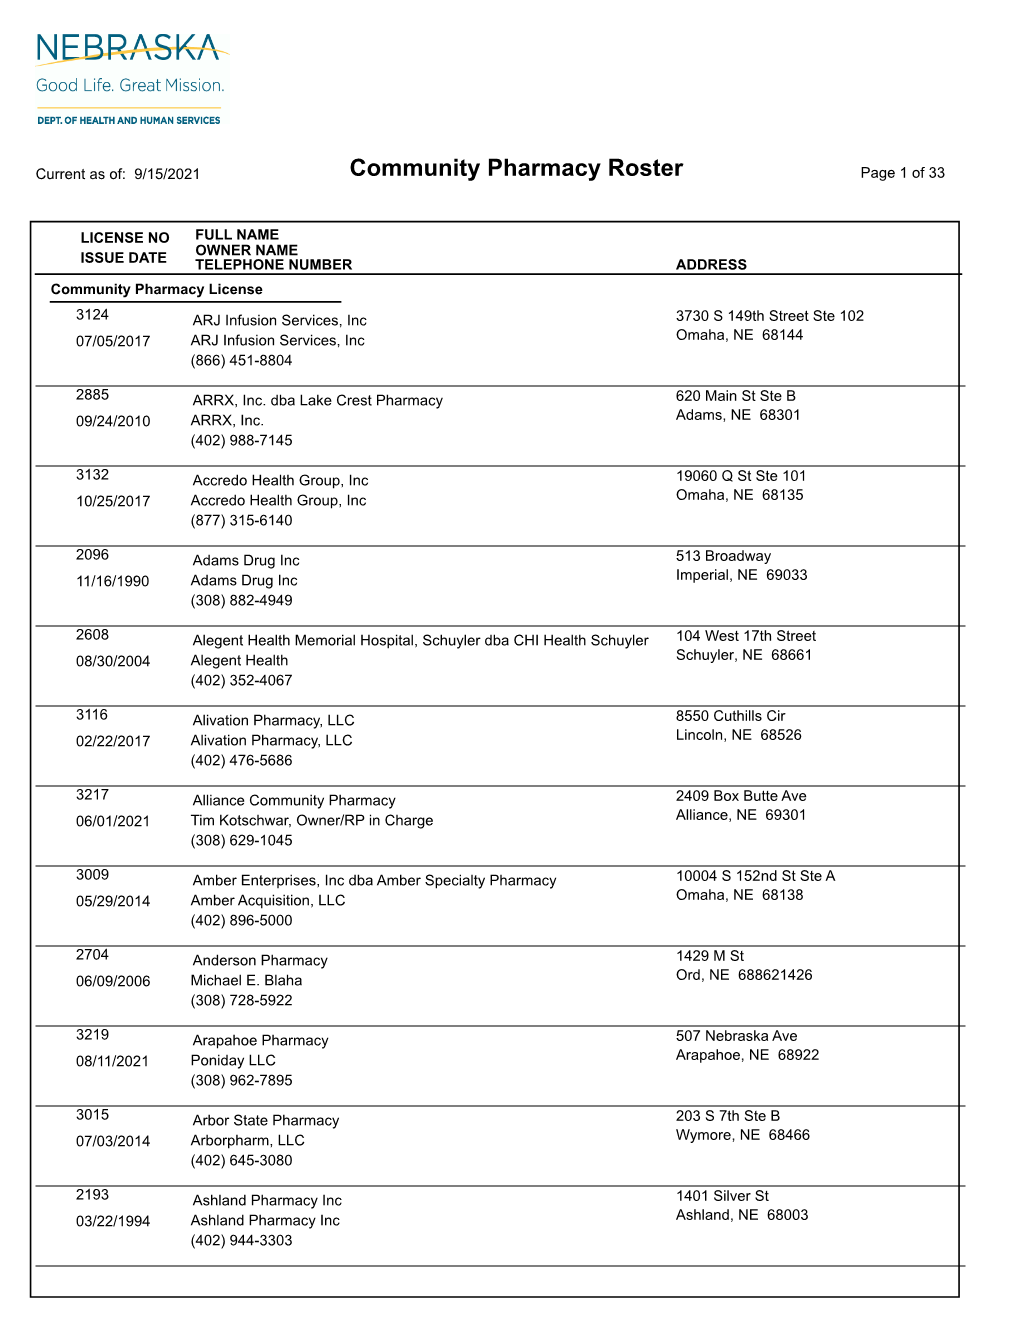 Community Pharmacy Roster Page 1 of 33